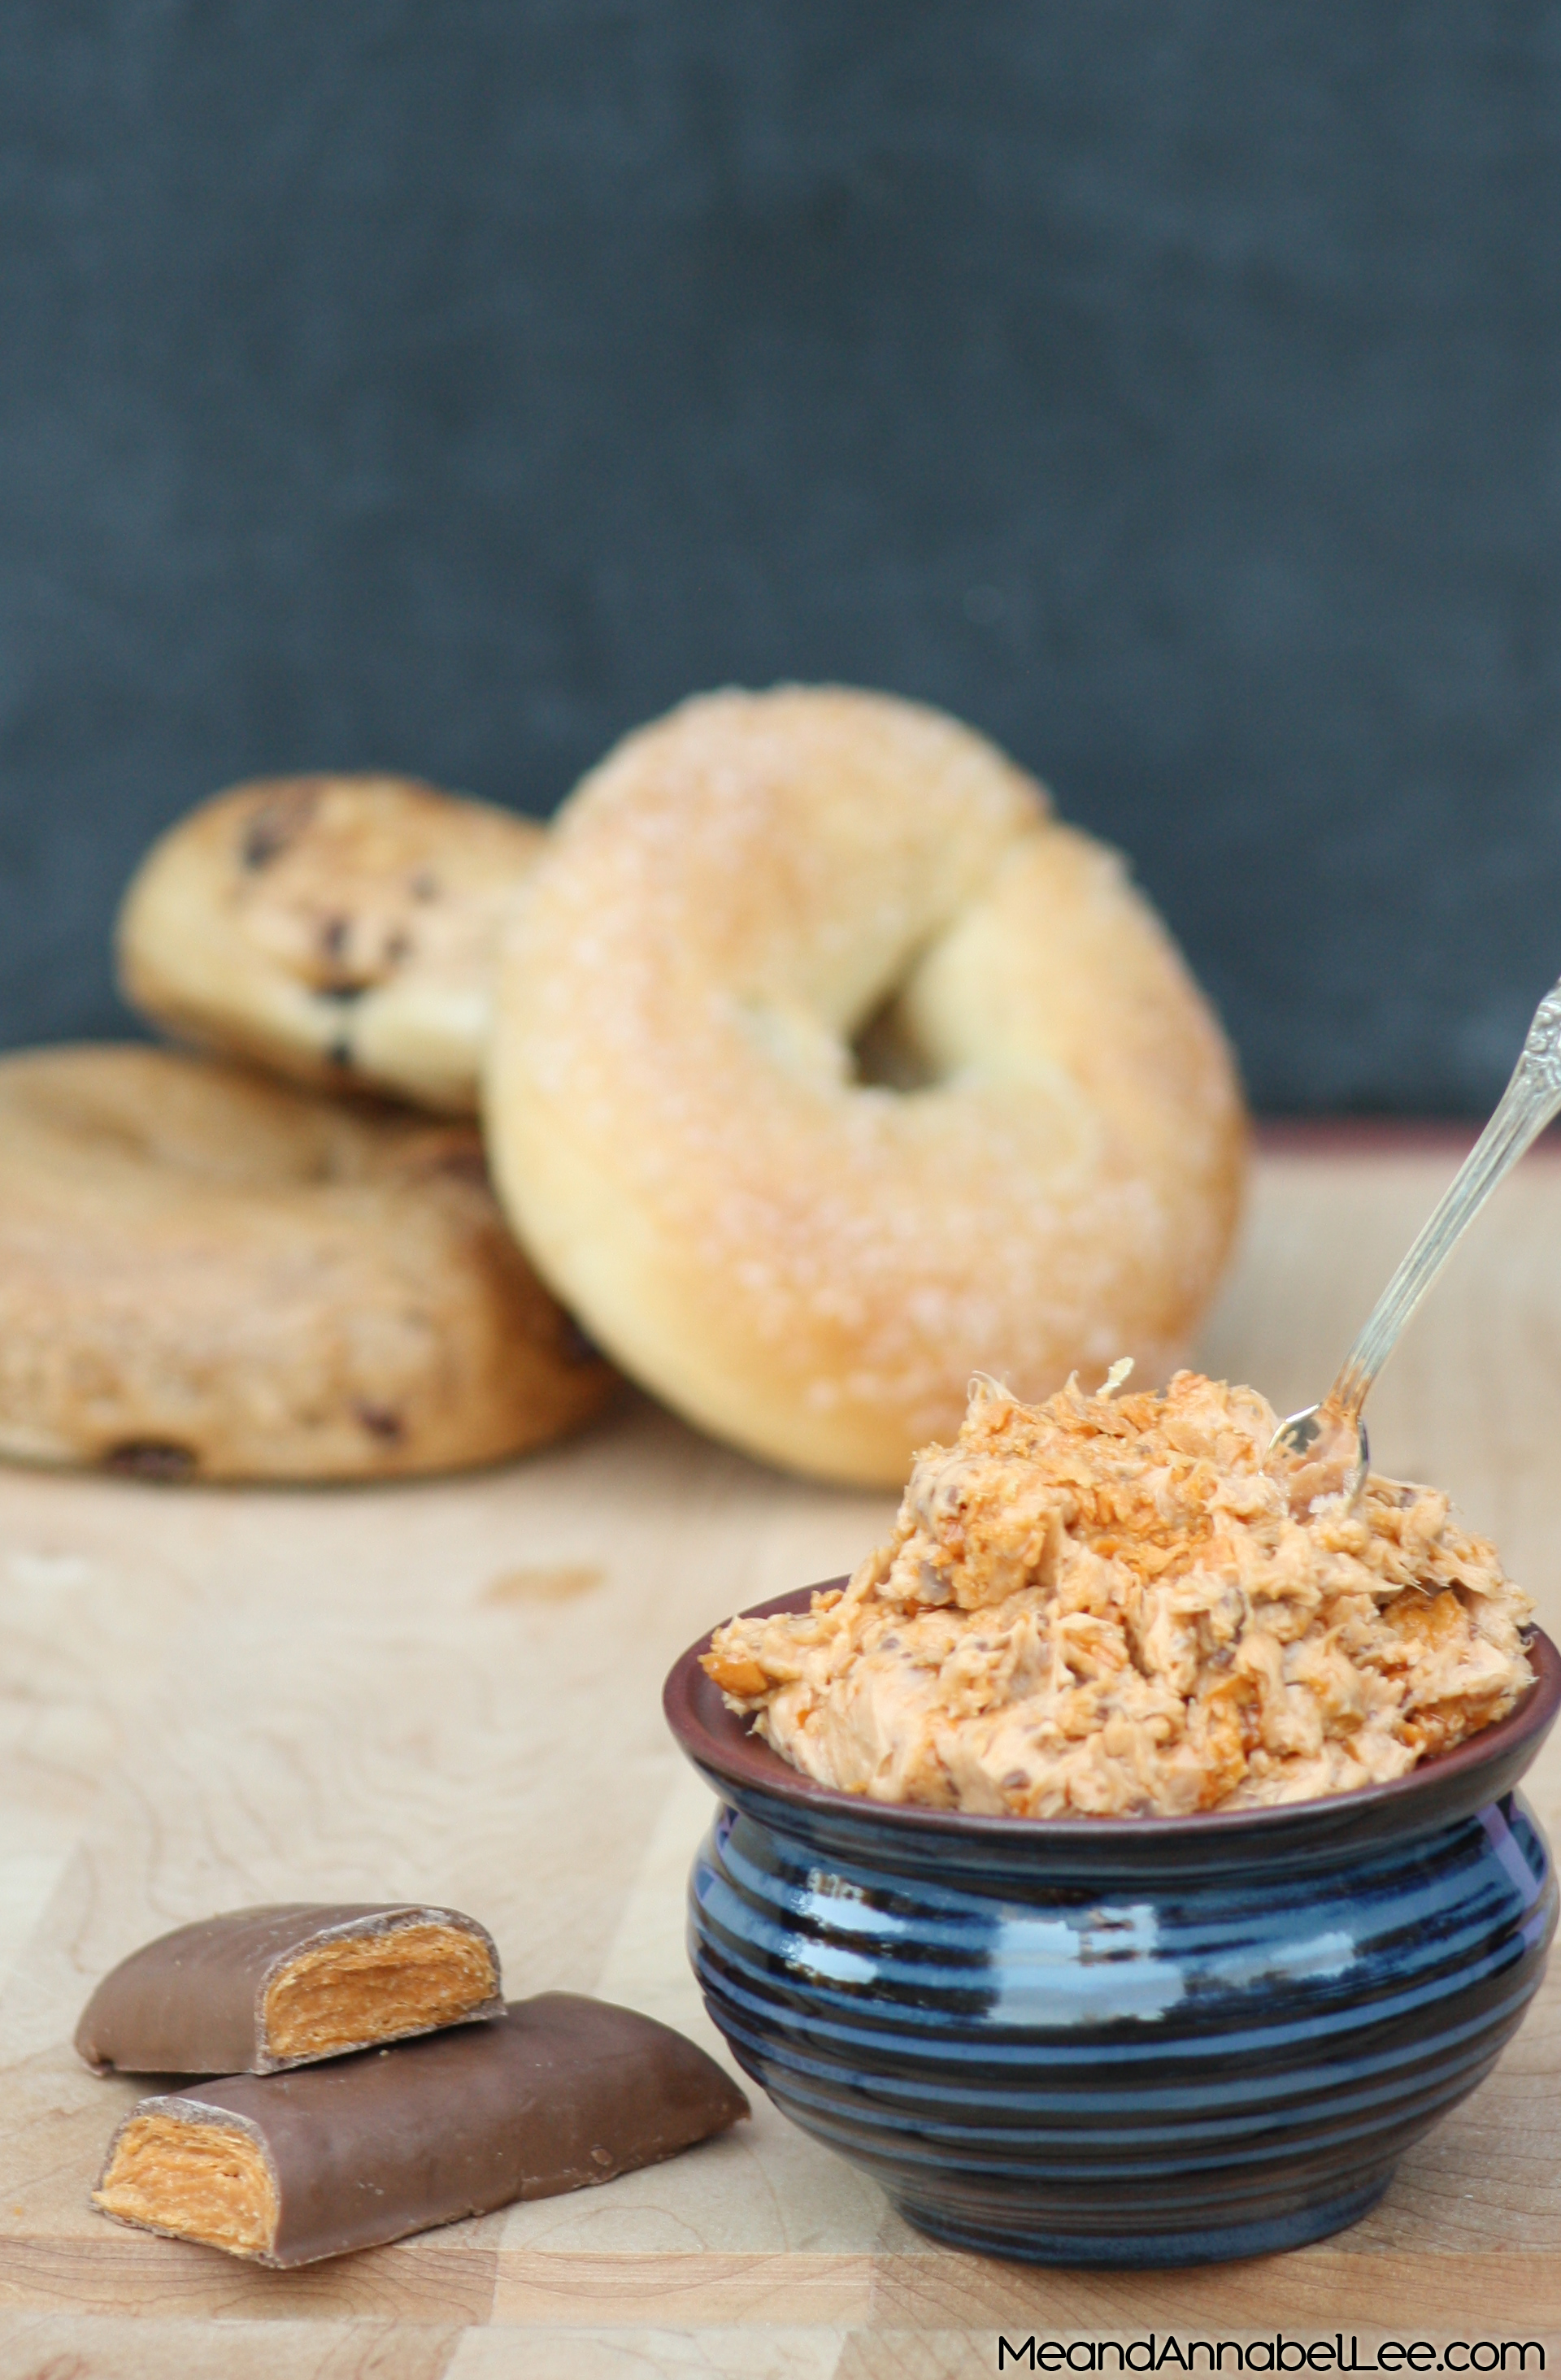 Butterfinger Cream Cheese Spread - Looking for something to do with that leftover Halloween Candy? Try this sweet spread! www.MeandAnnabelLee.com